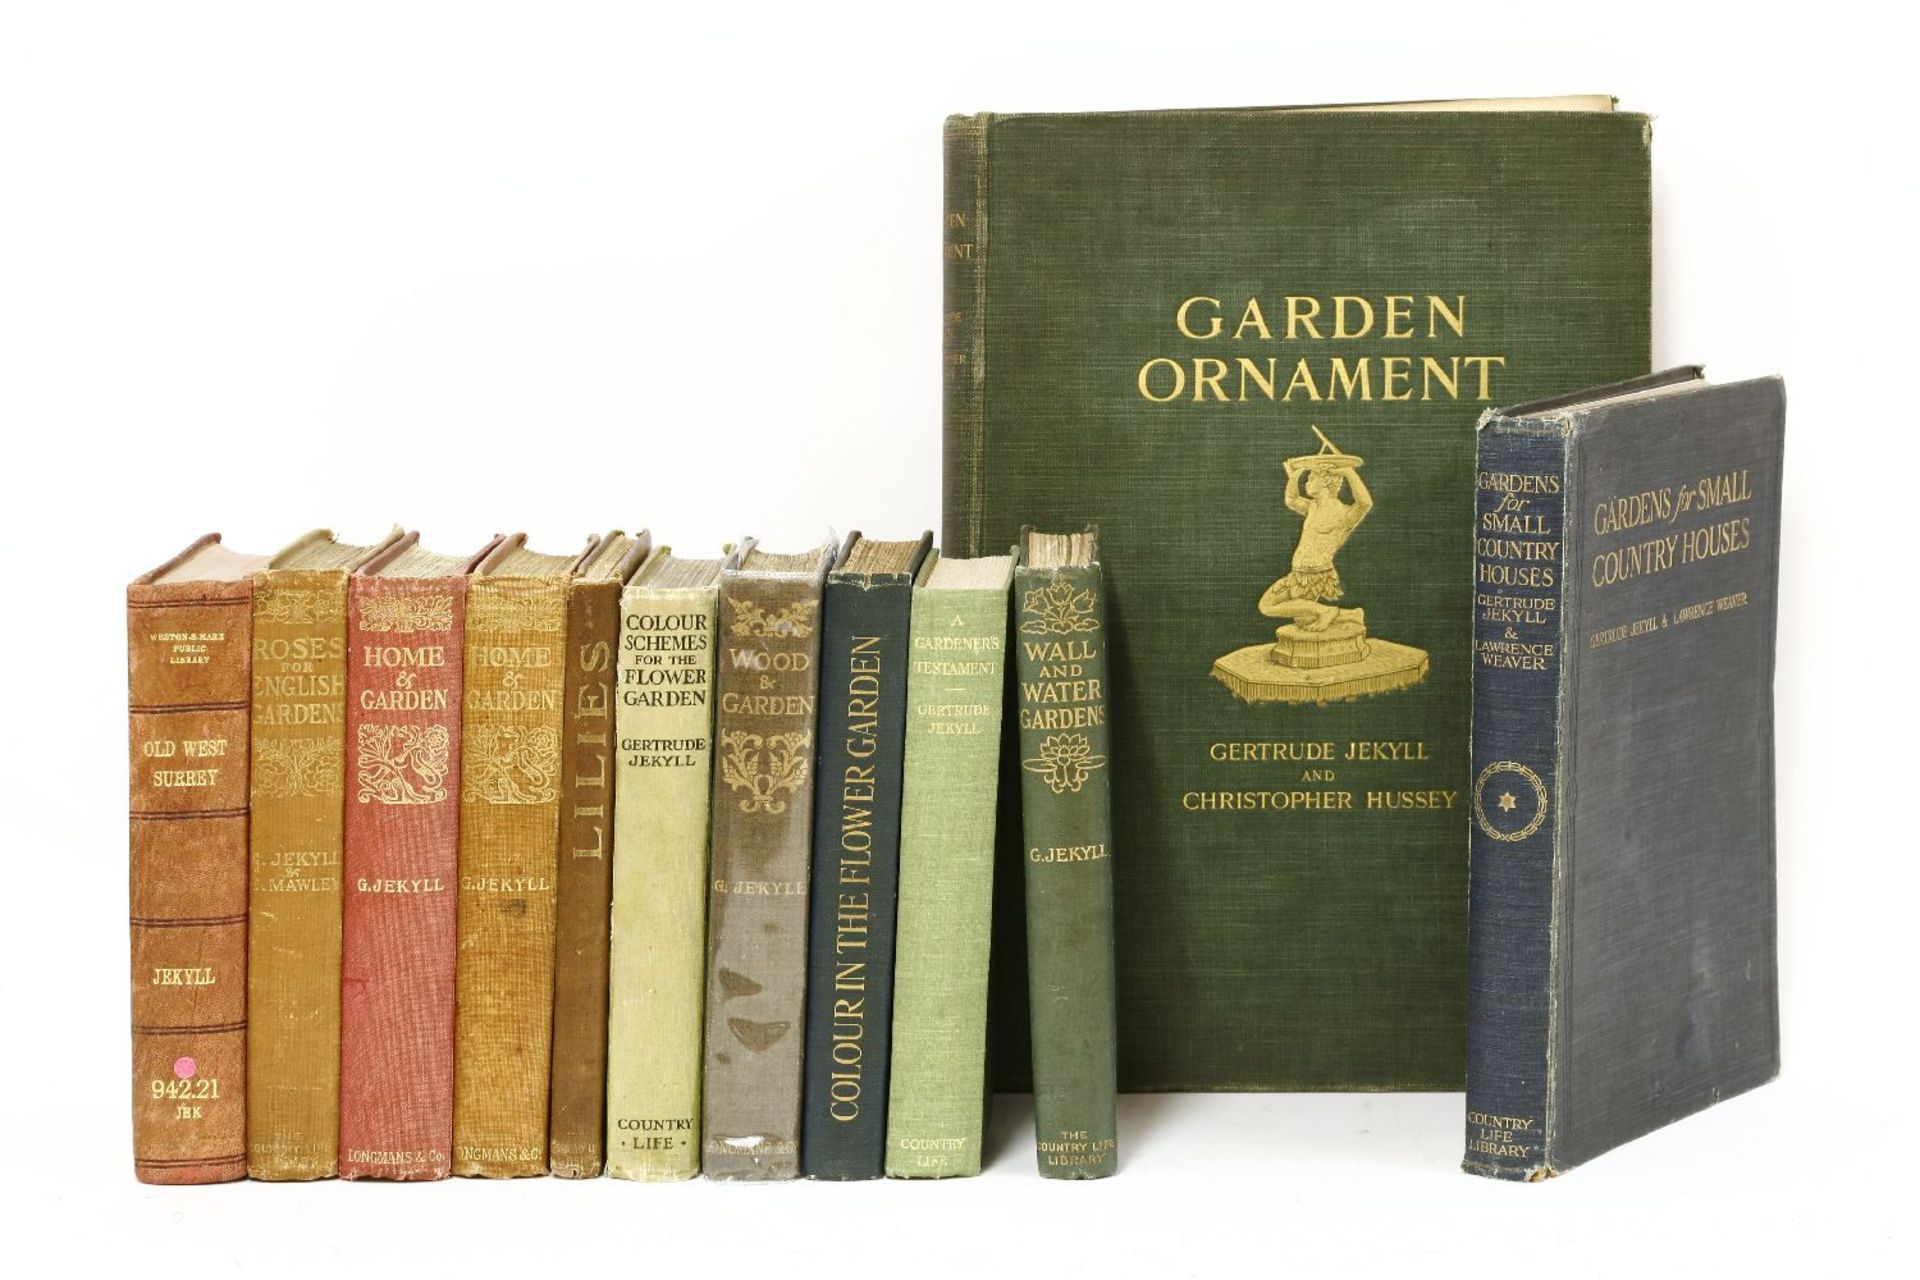 JEKYLL, Gertrude: 12 works, the following 8 are all first editions: Wood and Garden, 1899; Gardens